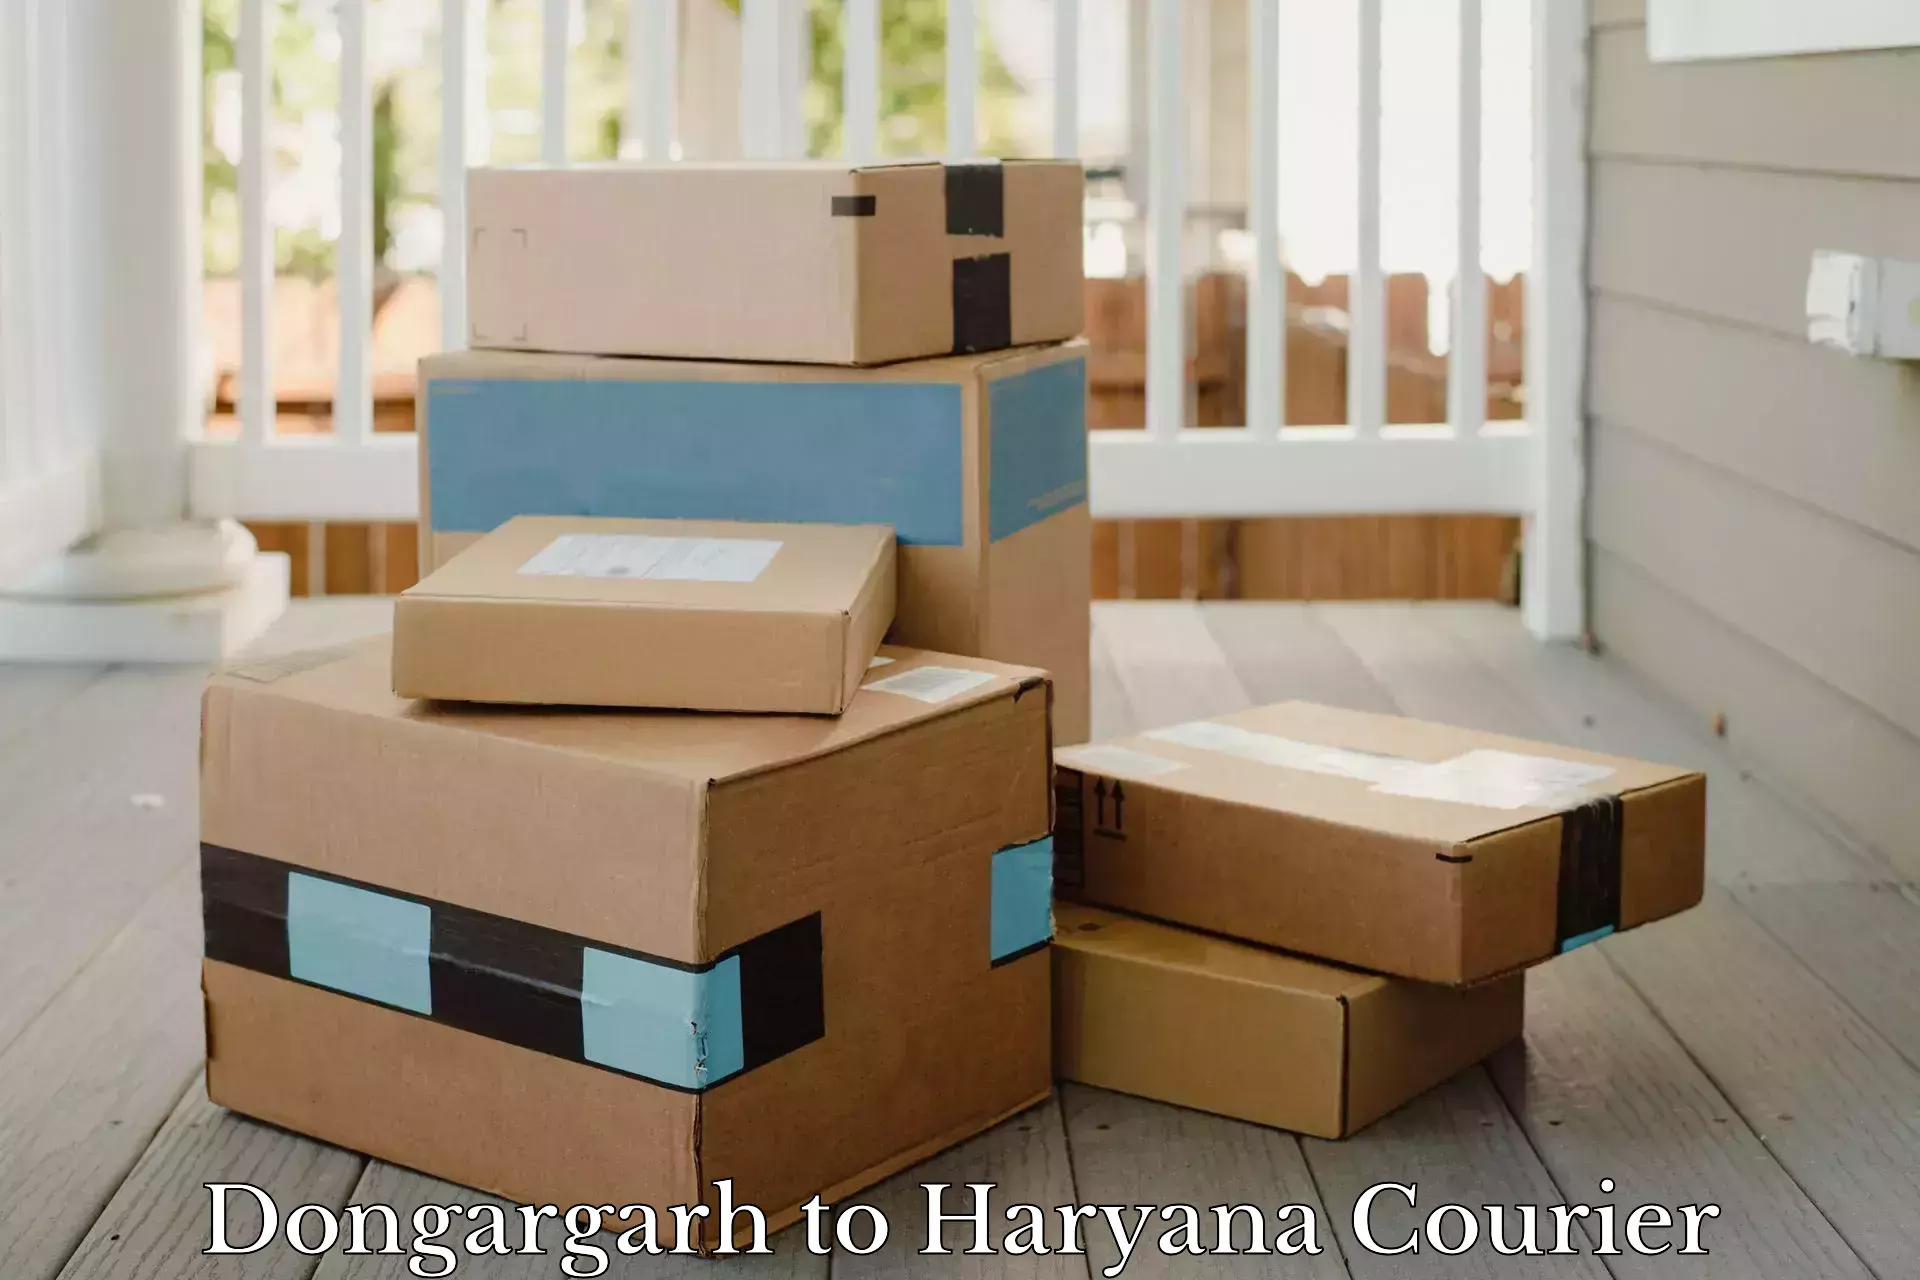 Reliable courier service Dongargarh to Faridabad